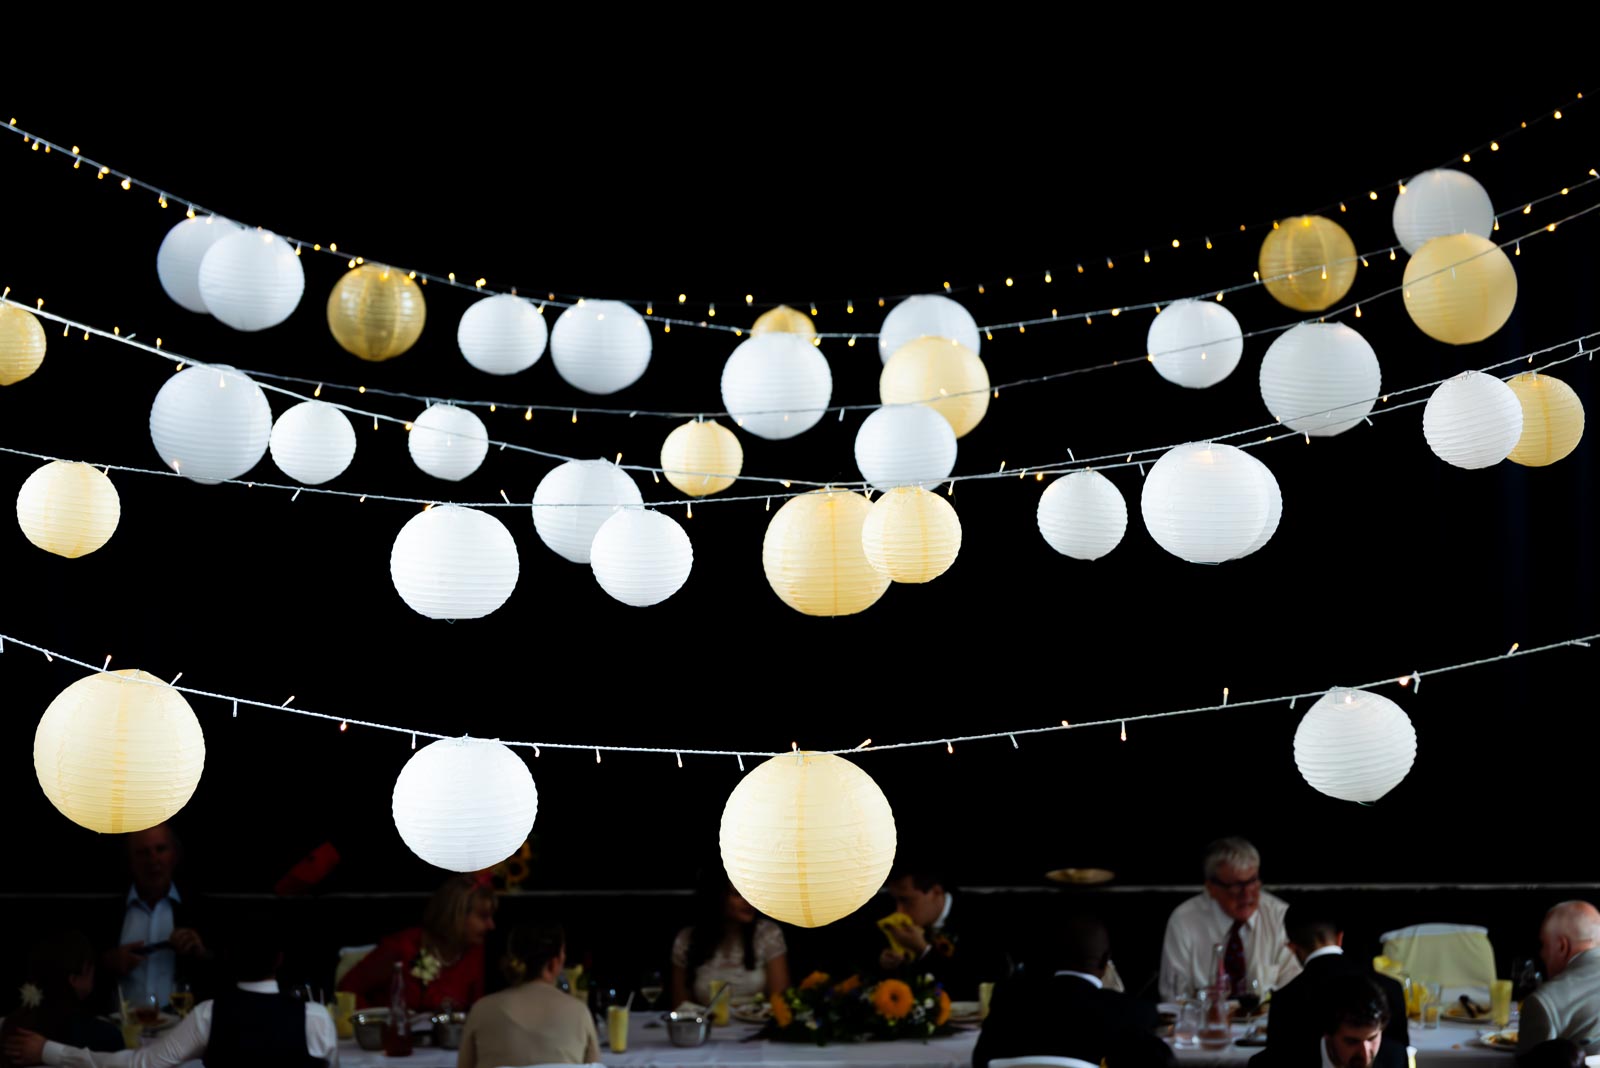 Glowing lantern lights illuminate the high ceiling at Ashley and Anjana's Wedding Reception in Lewes All Saints Centre.